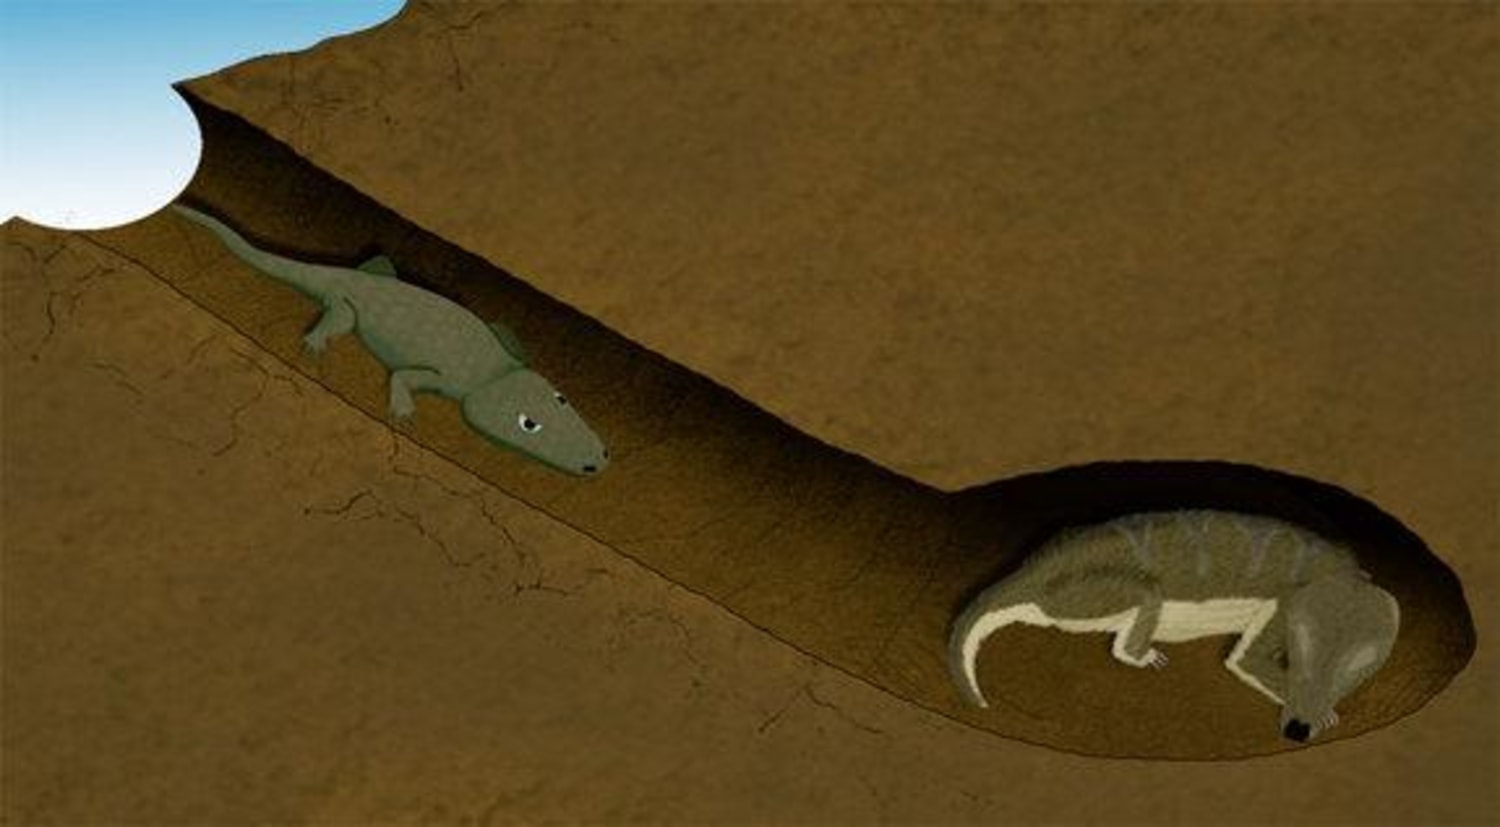 Strange bedfellows: Two creatures shared ancient burrow